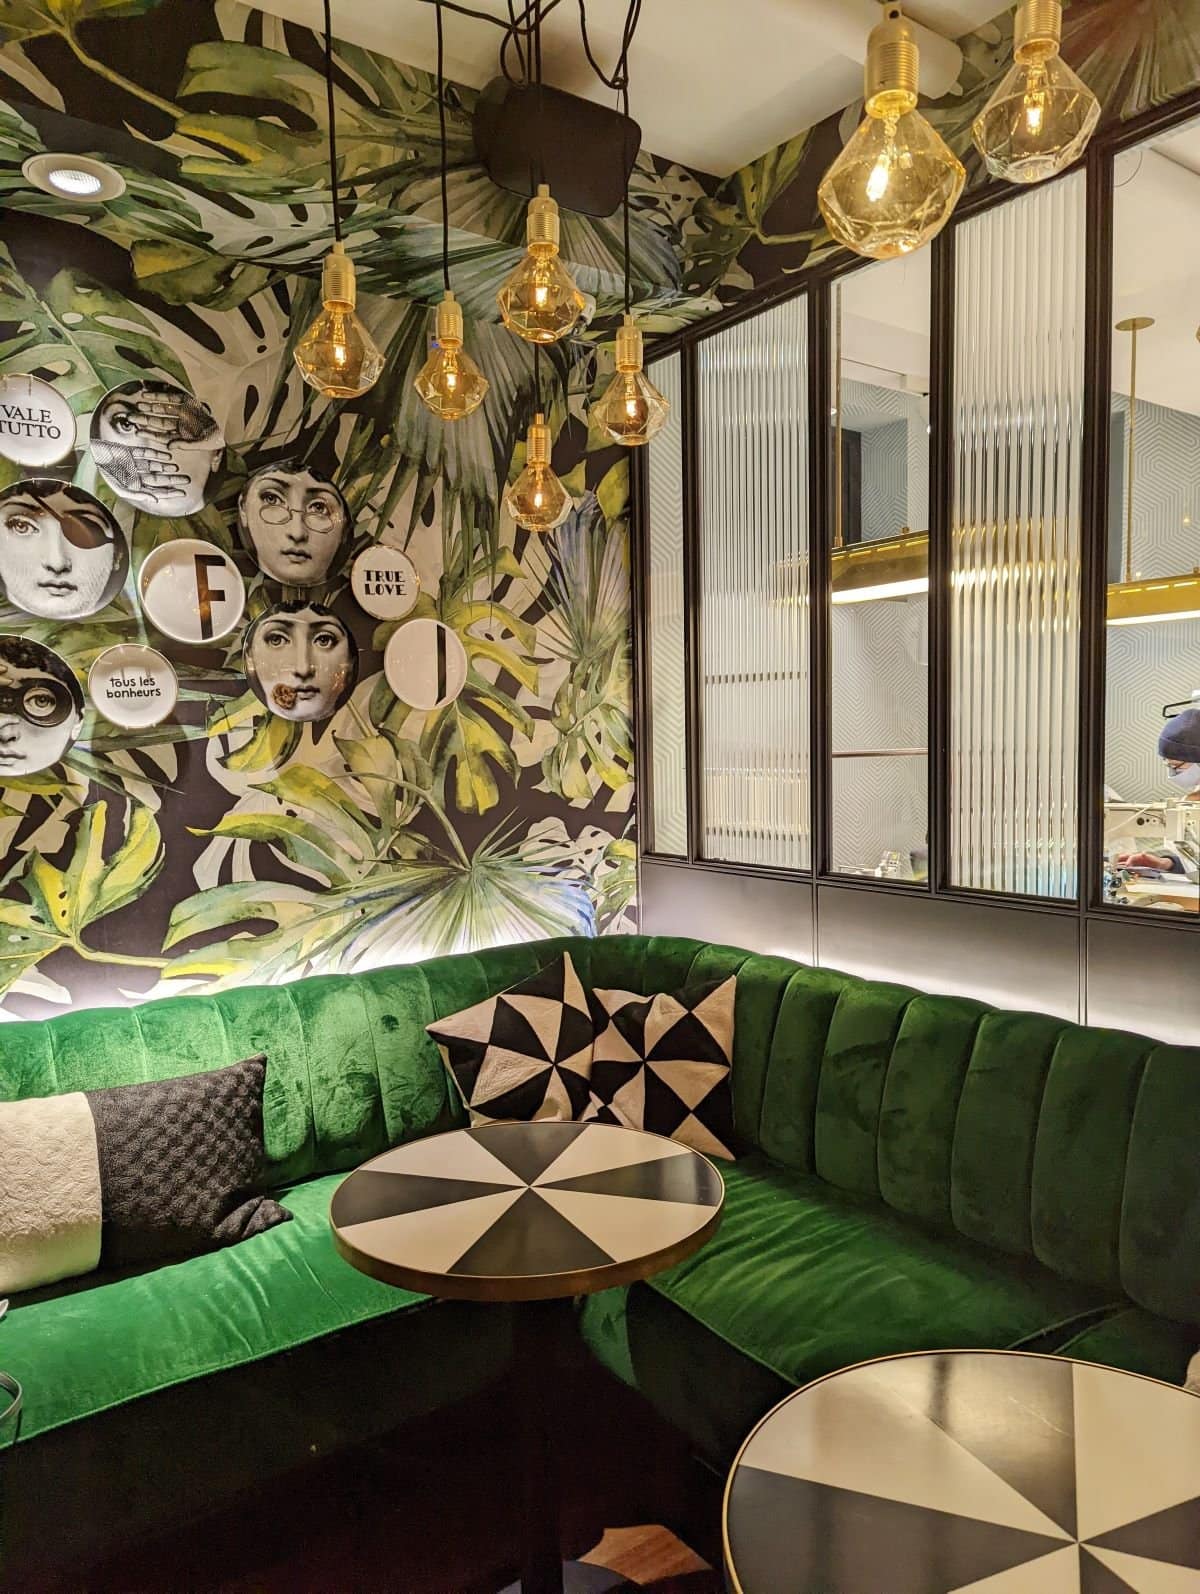 Cafe Susu seating with plush green couch and decorative wallpaper